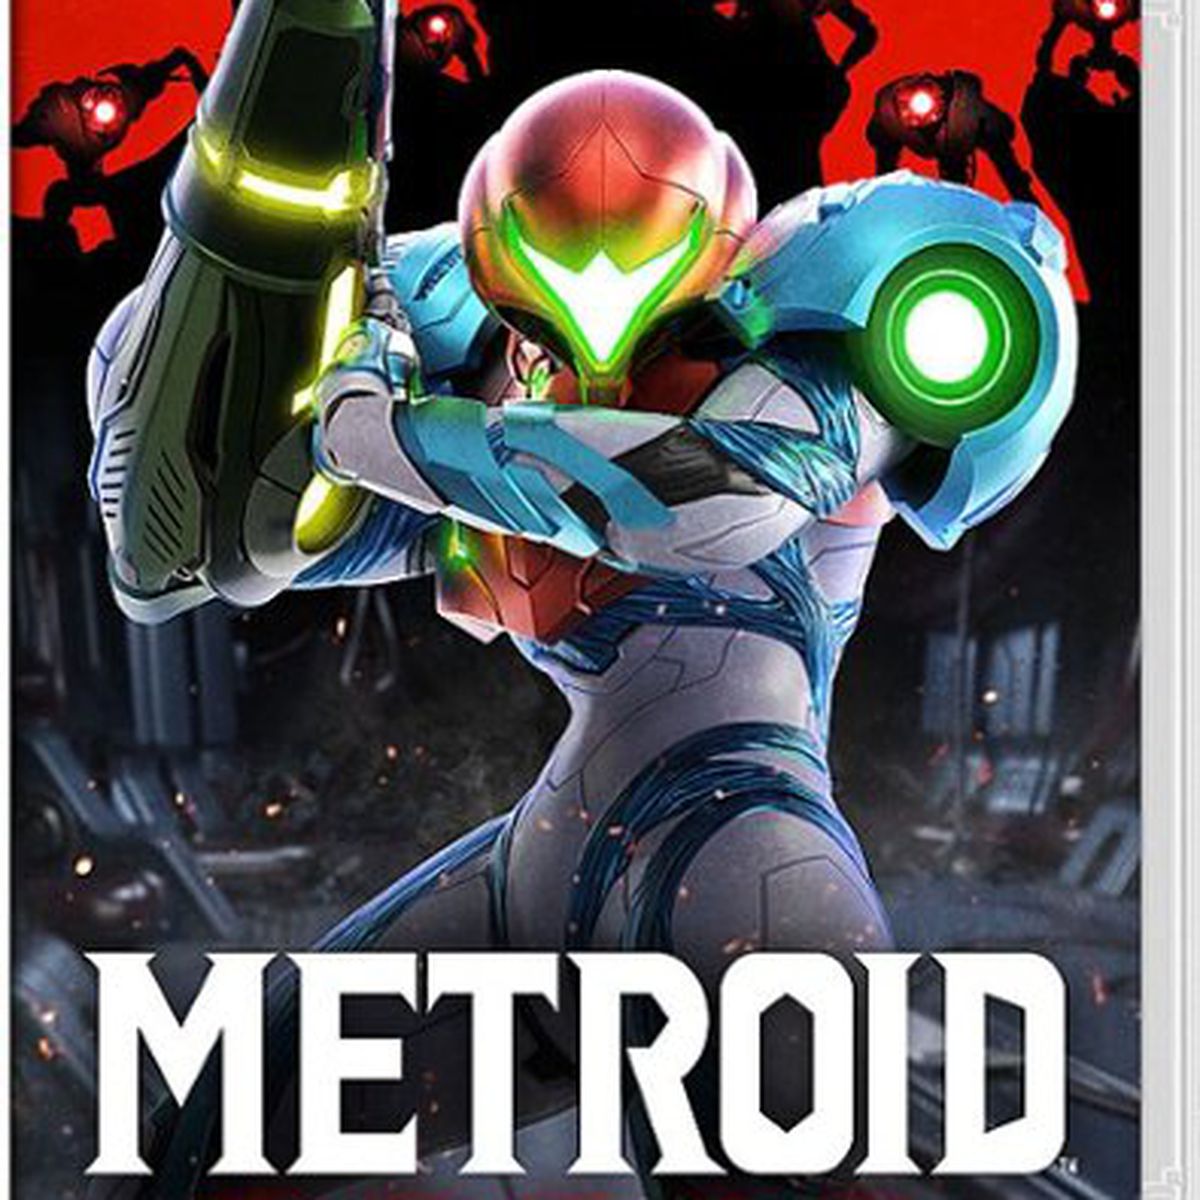 The Switch physical edition of Metroid Dread